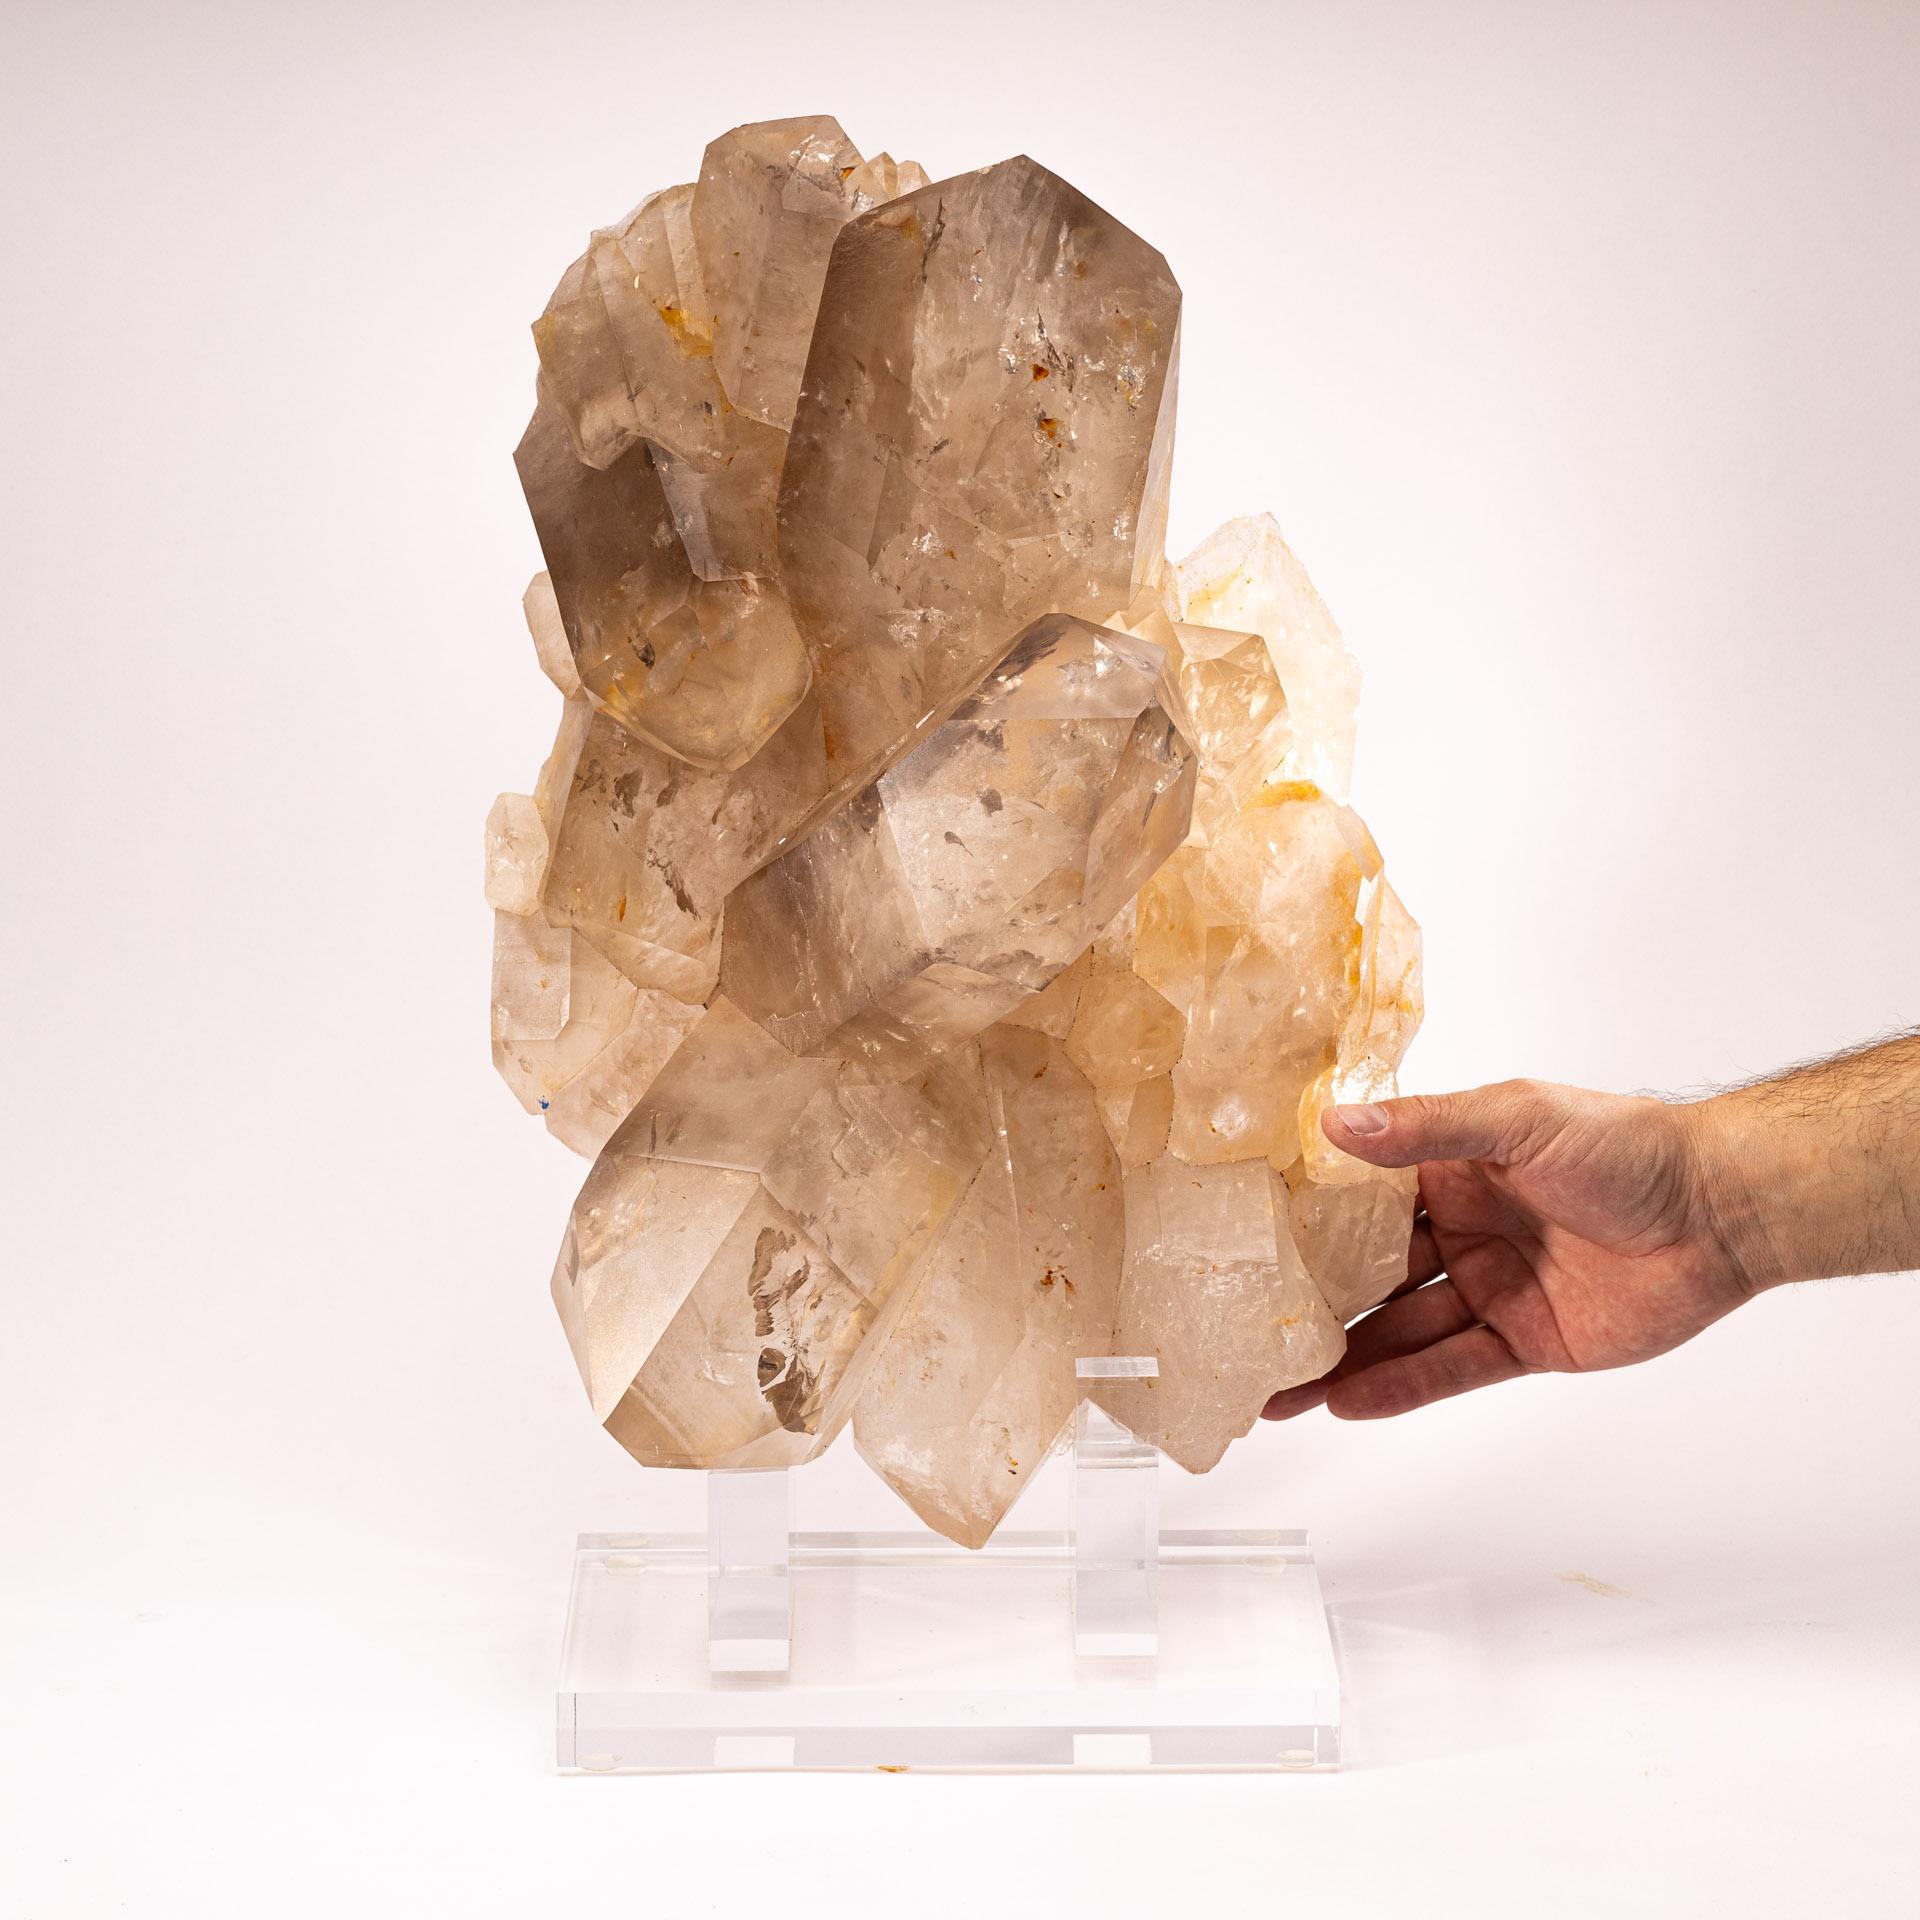 Mexican Natural Brazilian Quartz Specimen cluster Mounted on Custom Acrylic Base For Sale